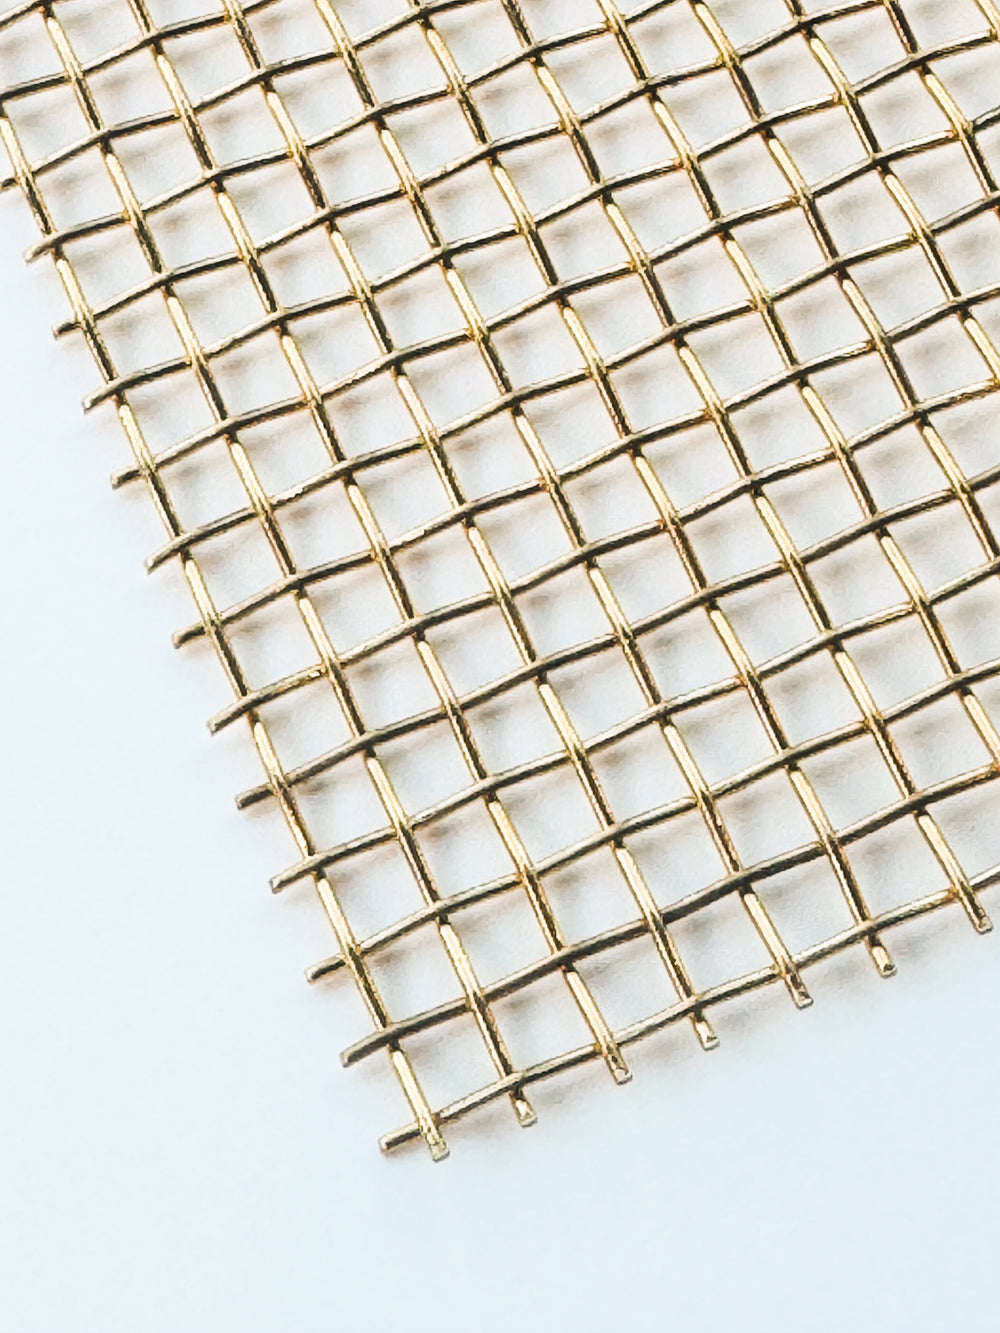 Wire Mesh Brass Furniture and Creative Grille Mesh B4 - Purdy Hardware - Wire Mesh